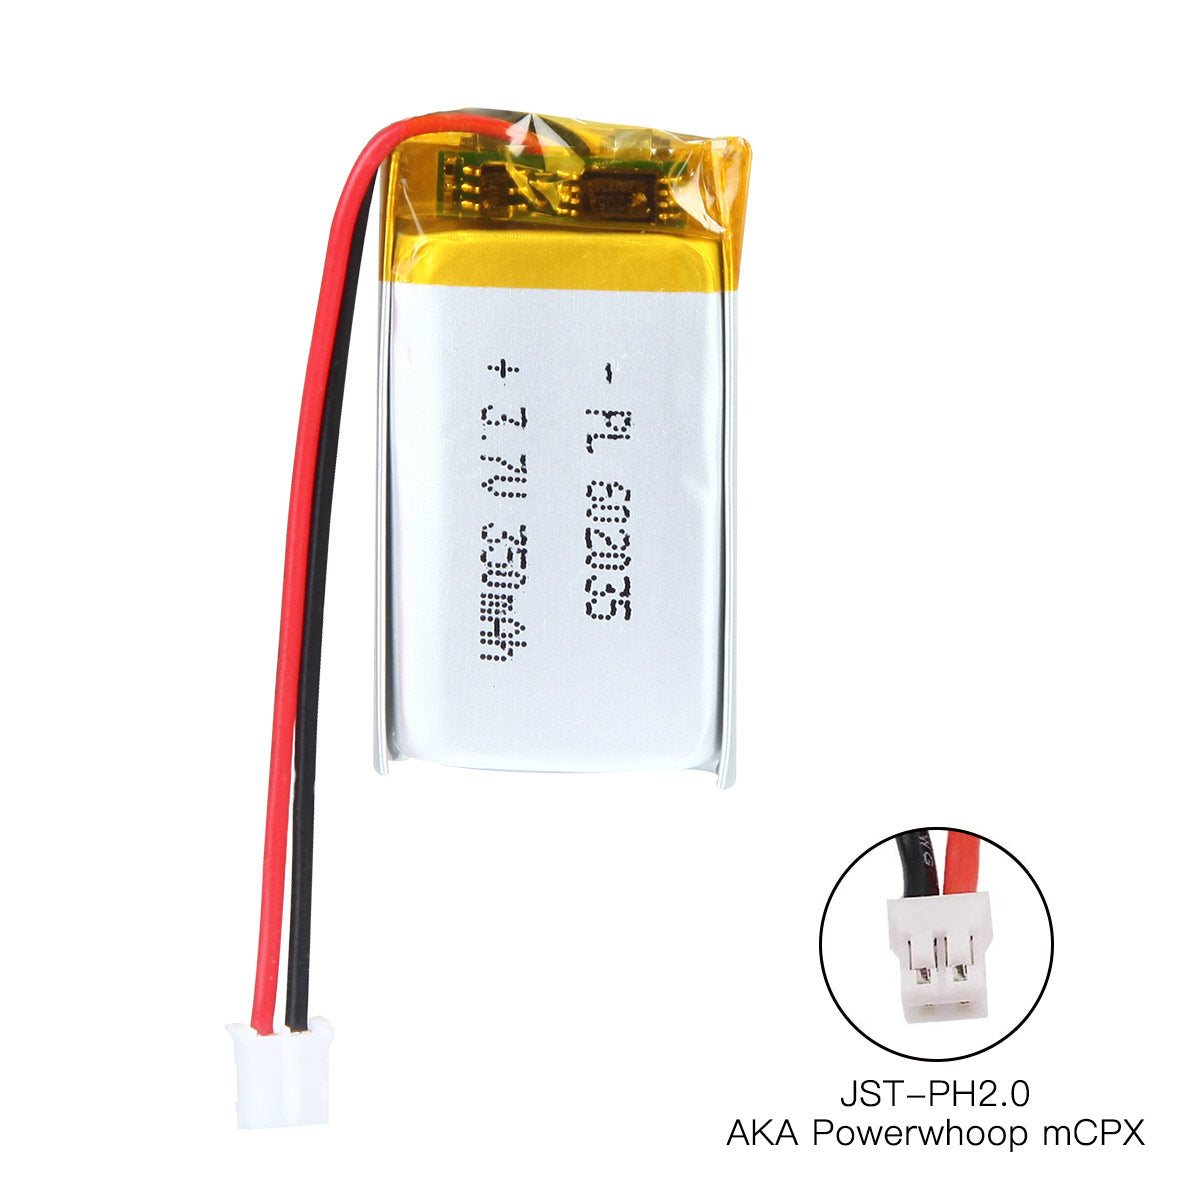 YDL 3.7V 350mAh 602035 Rechargeable Polymer Lithium-Ion Battery